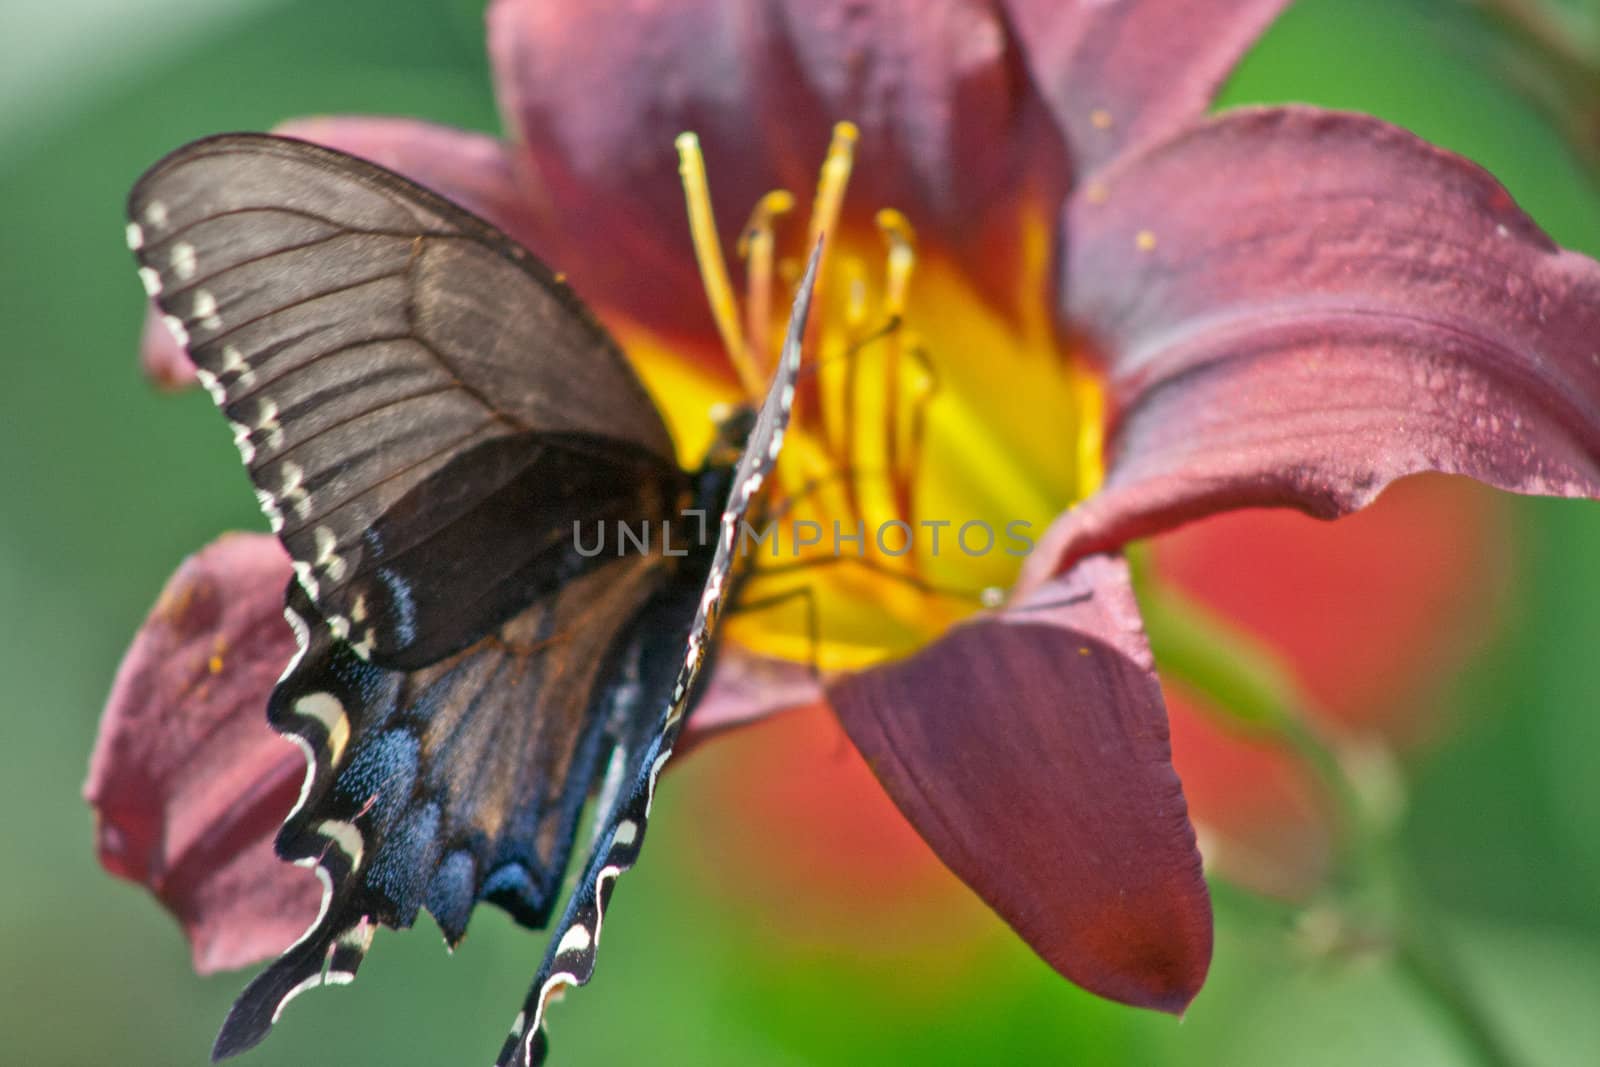 Sawllow Tail Butterfly on a Day Lilly by rothphotosc